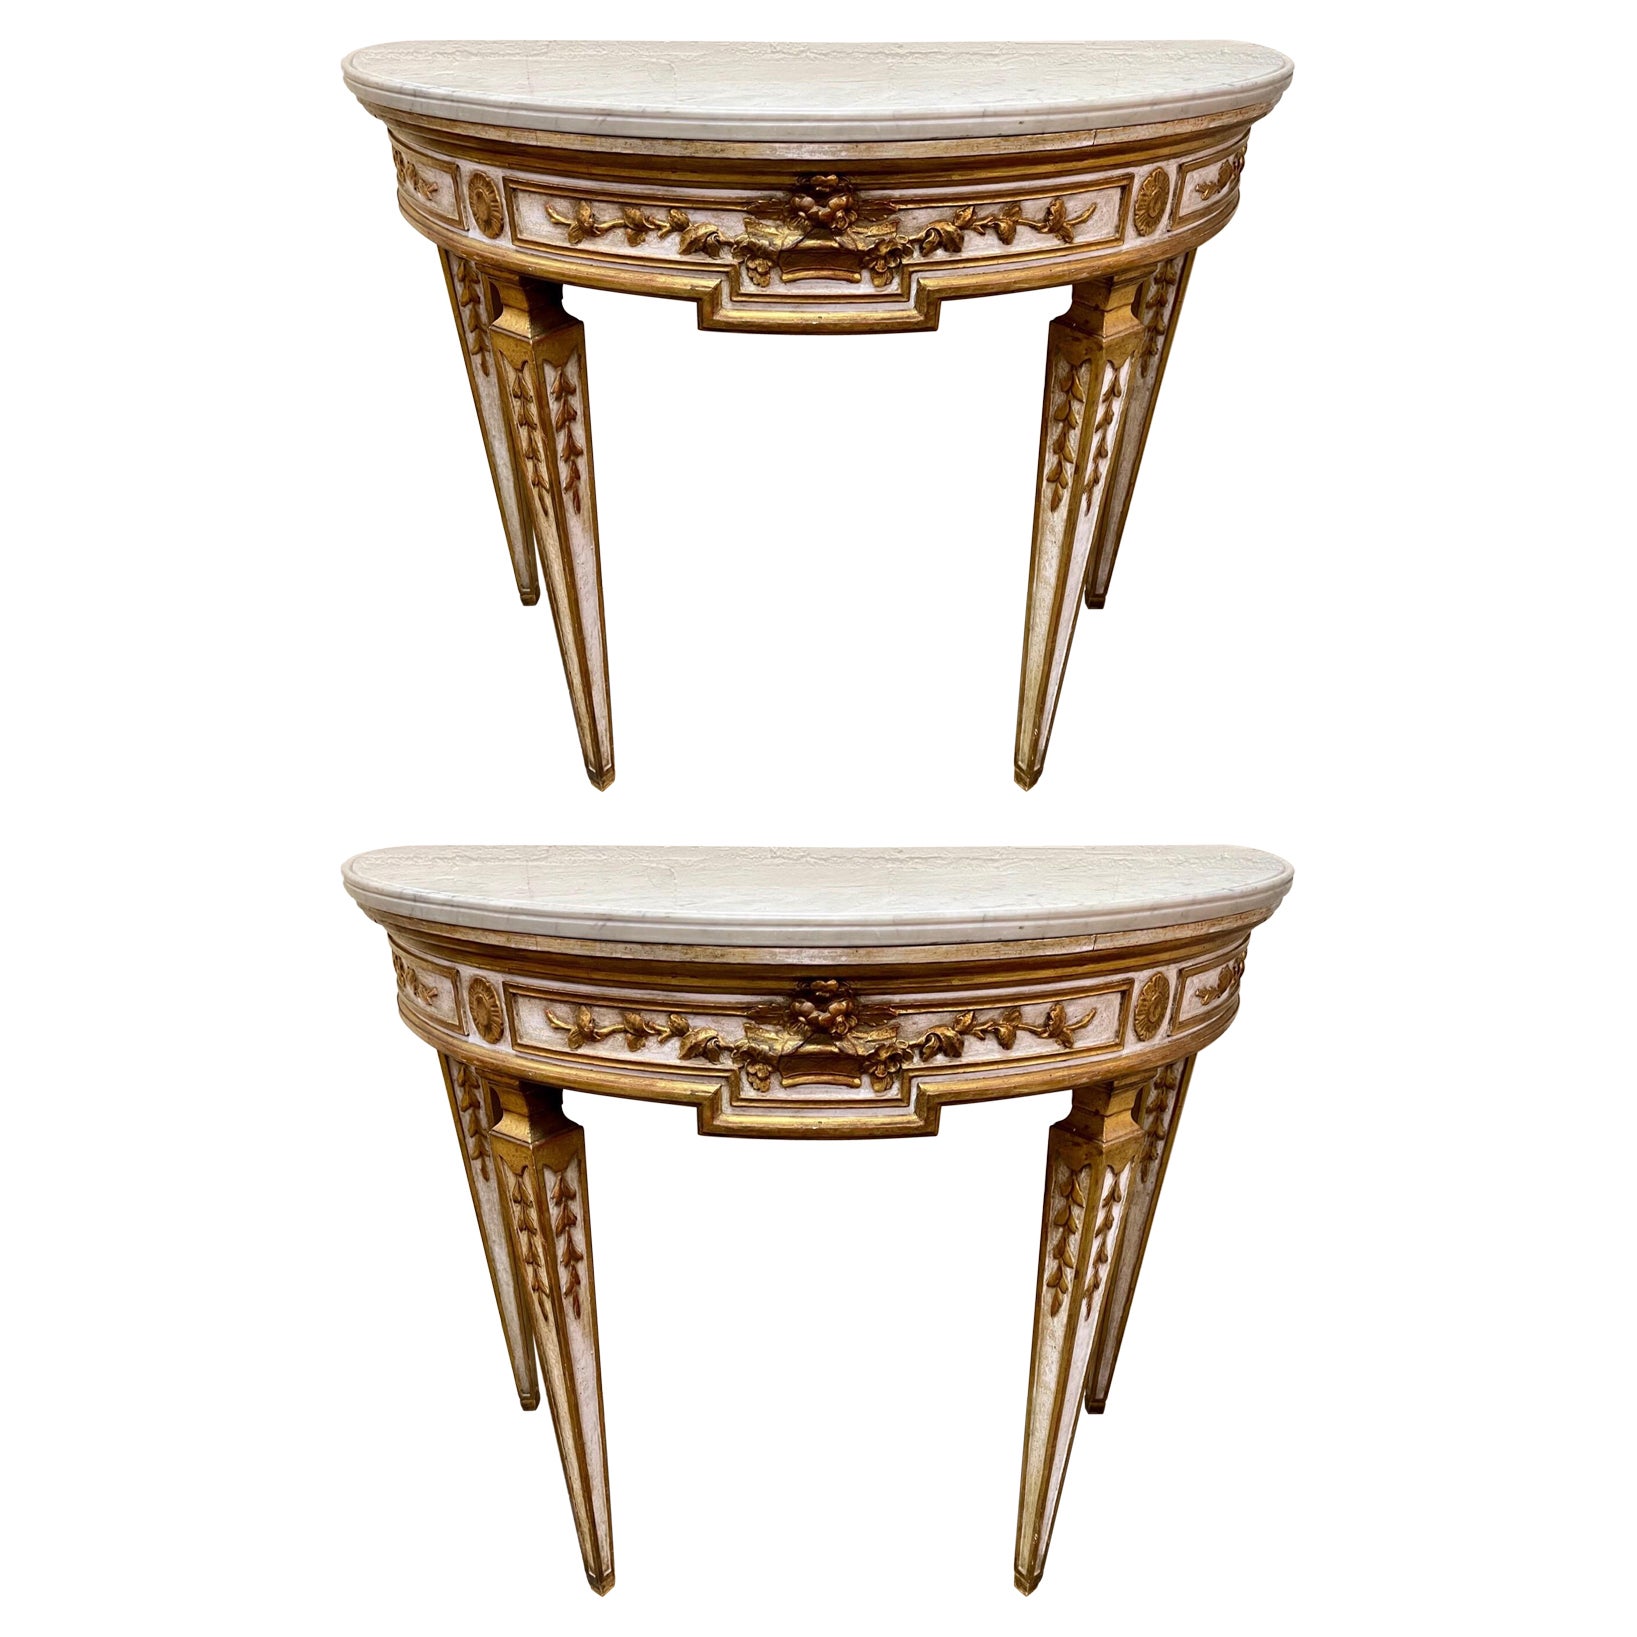 Pair of French Louis XVI Style Carved and Parcel Gilt Consoles with Marble Tops